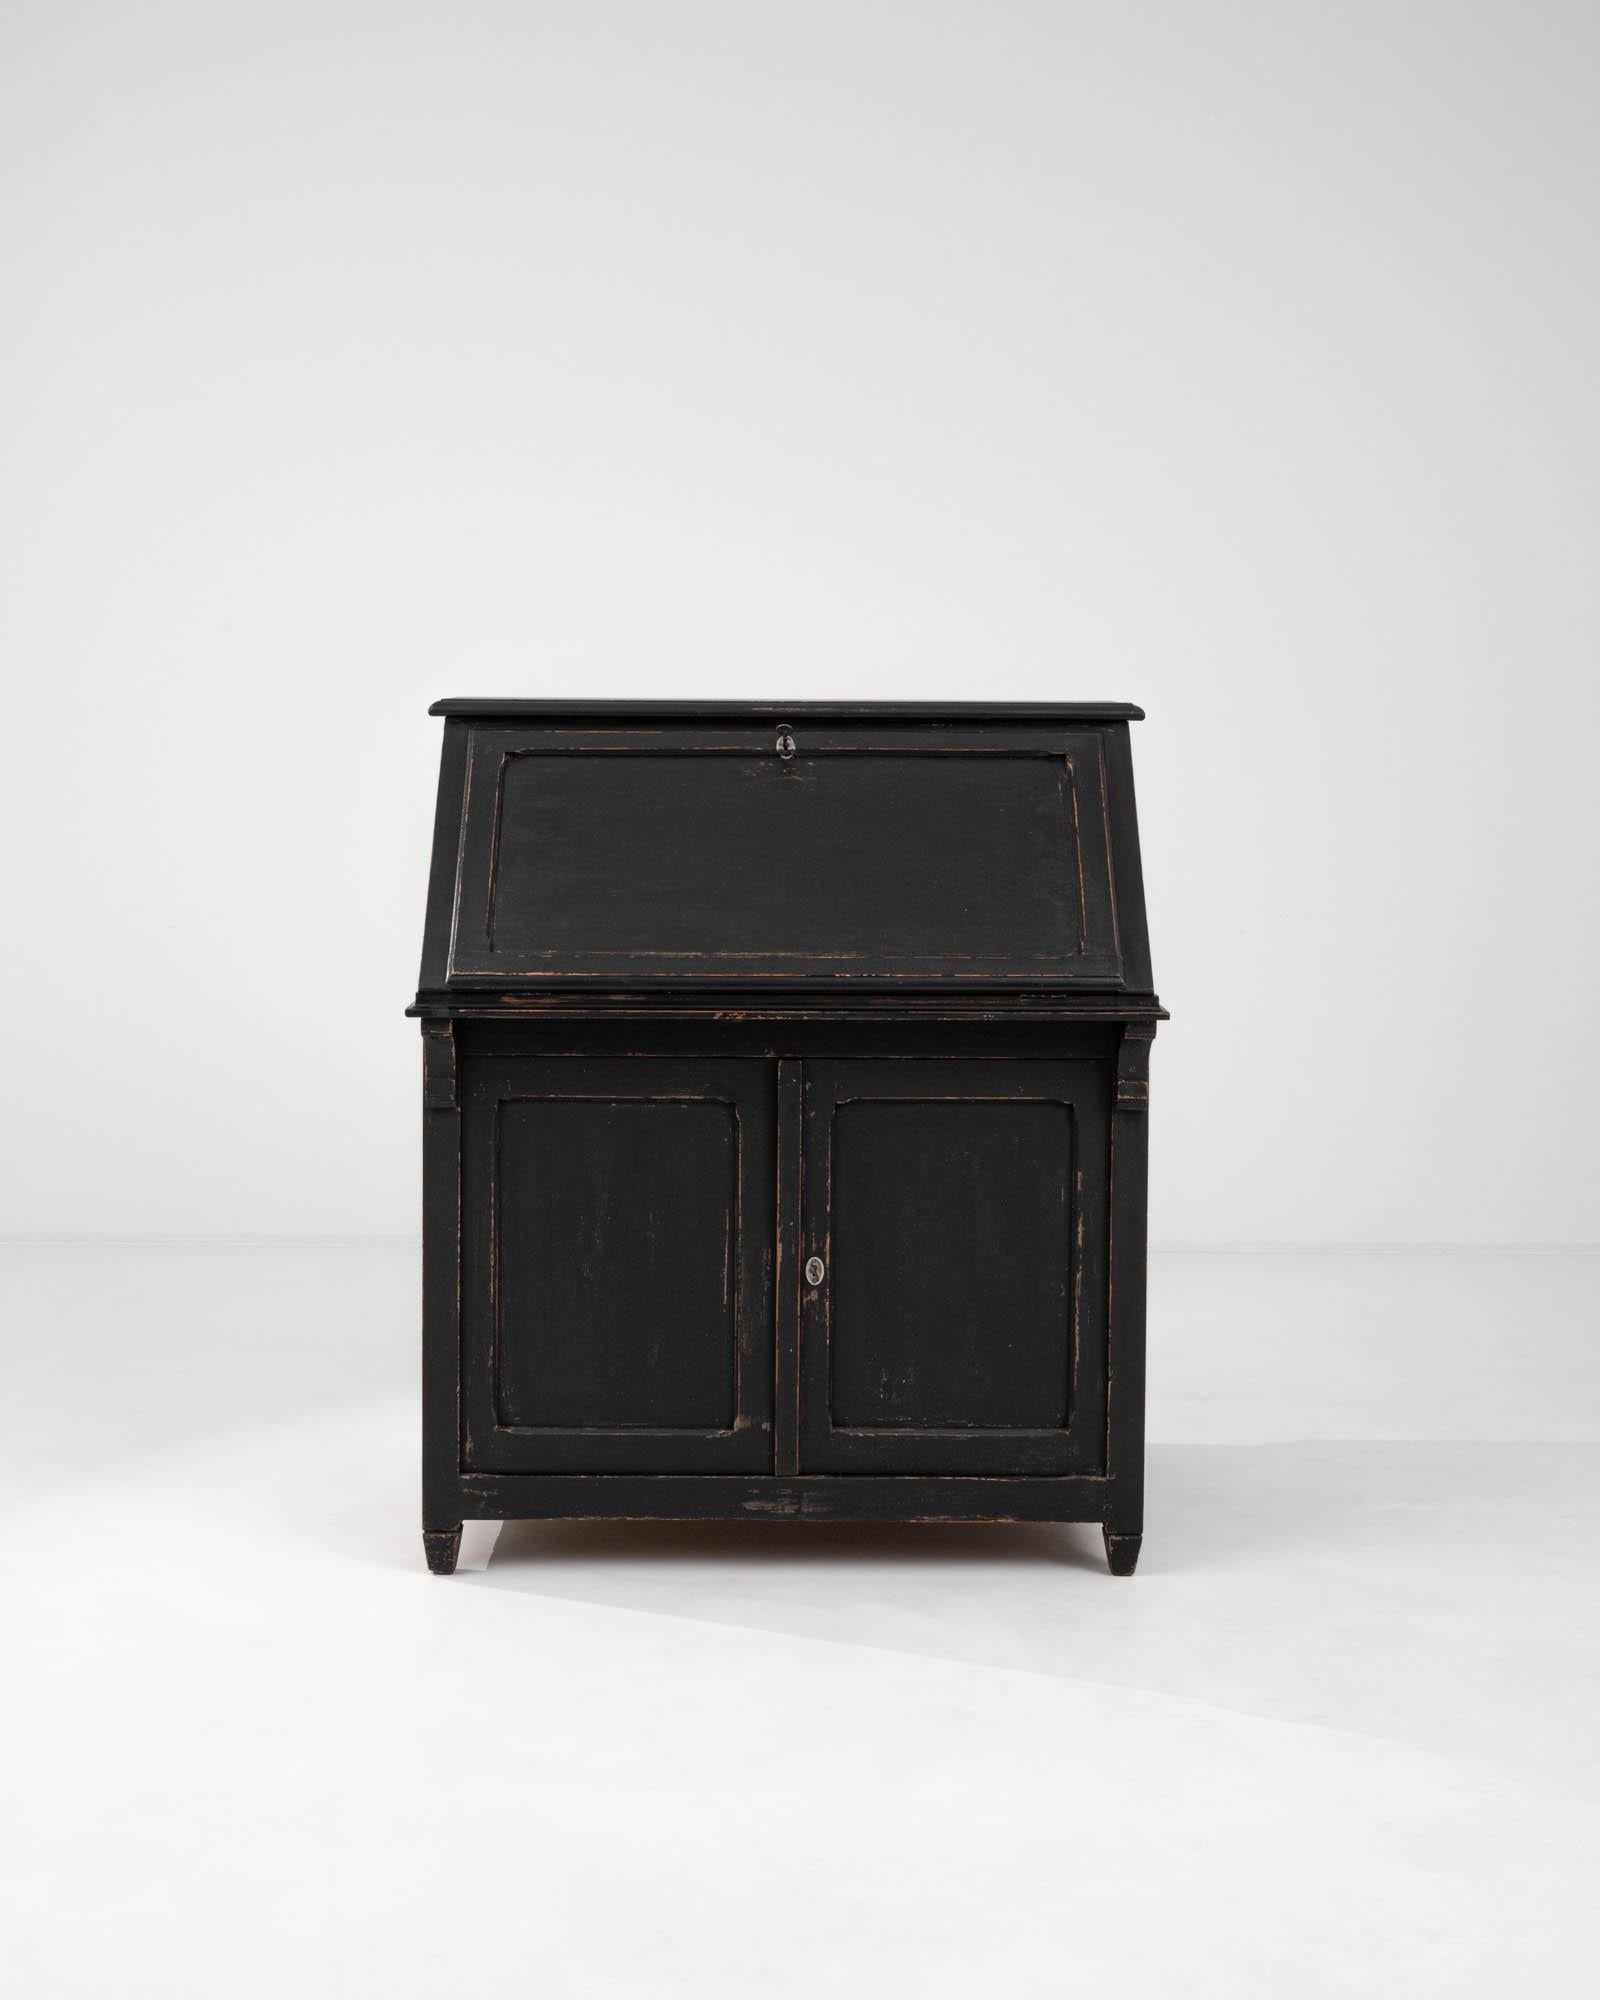 This early 20th-century French wood patinated desk exemplifies classic charm and functional design. Its unique architectural form, reminiscent of a stately structure, is accentuated by a deep black patina that highlights the edges and contours,